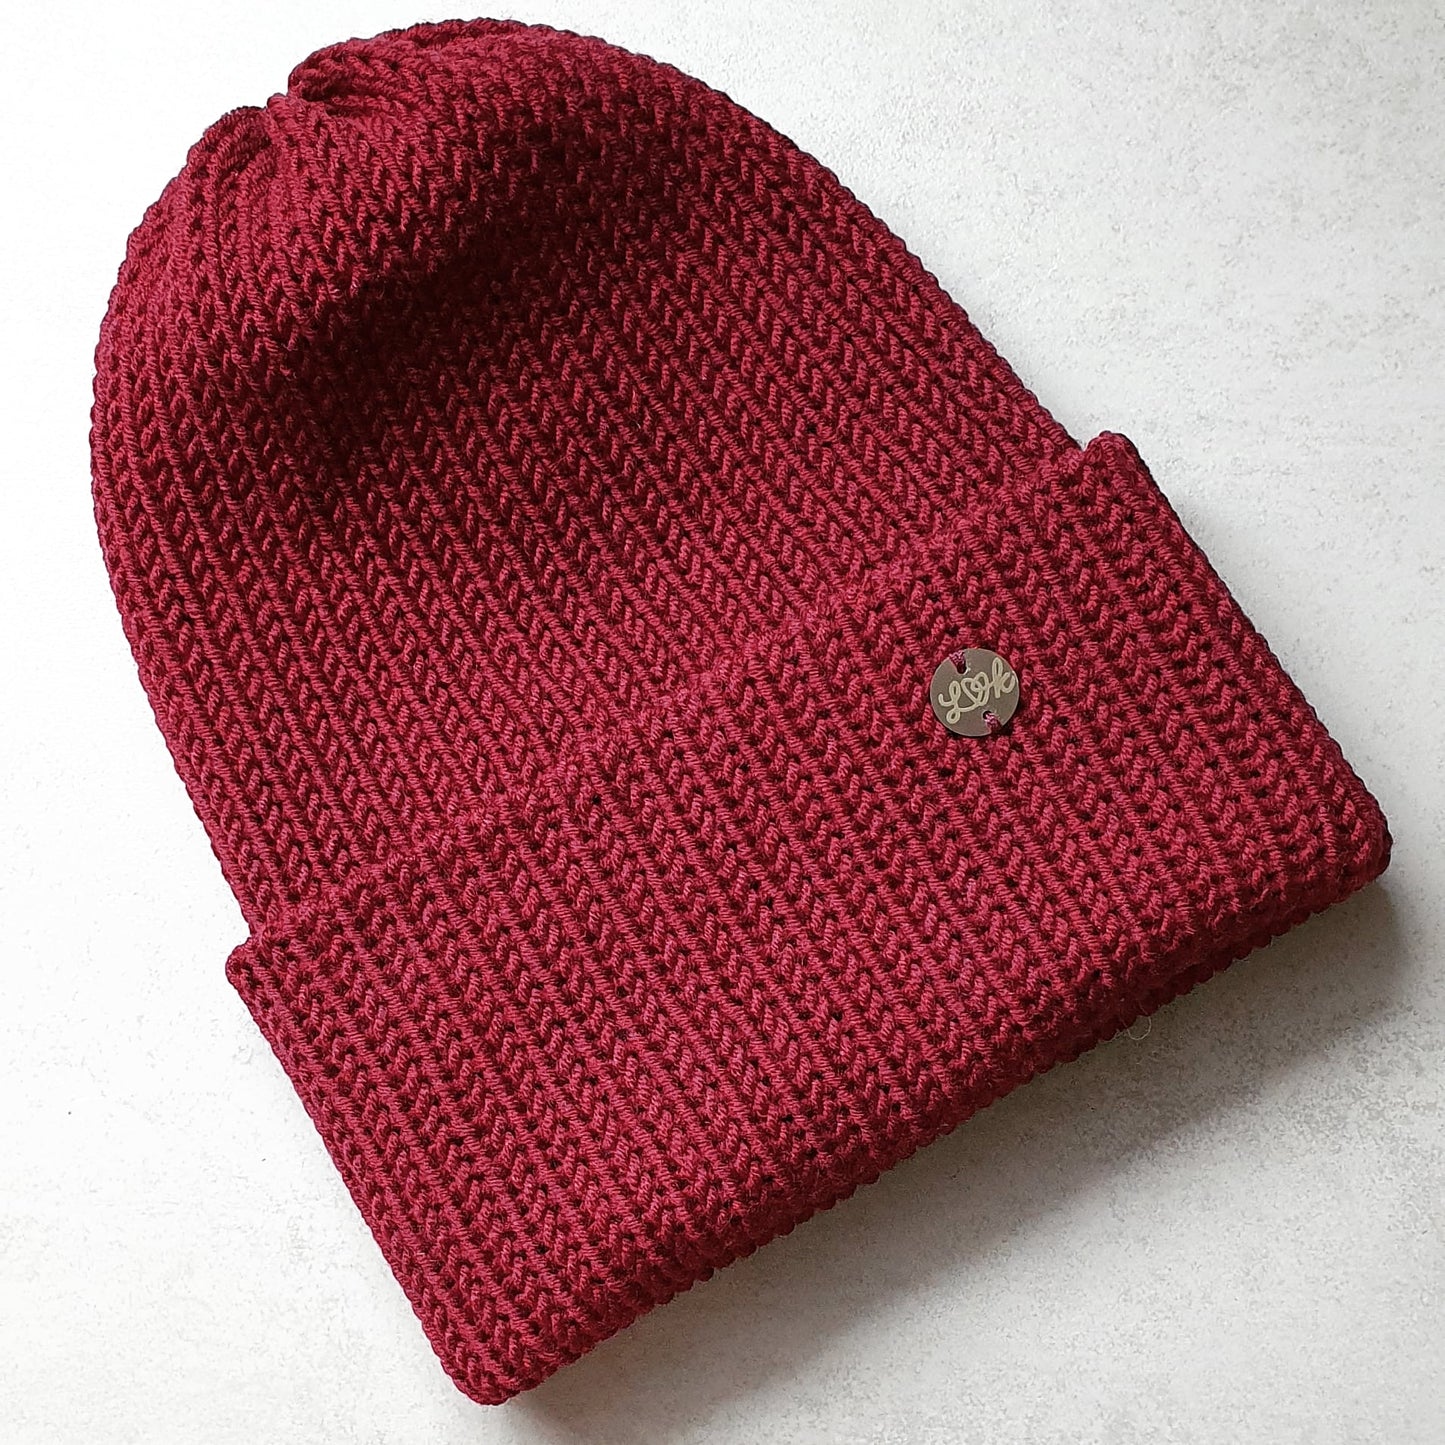 Hand-knitted hat made from 100% merino wool in many colours